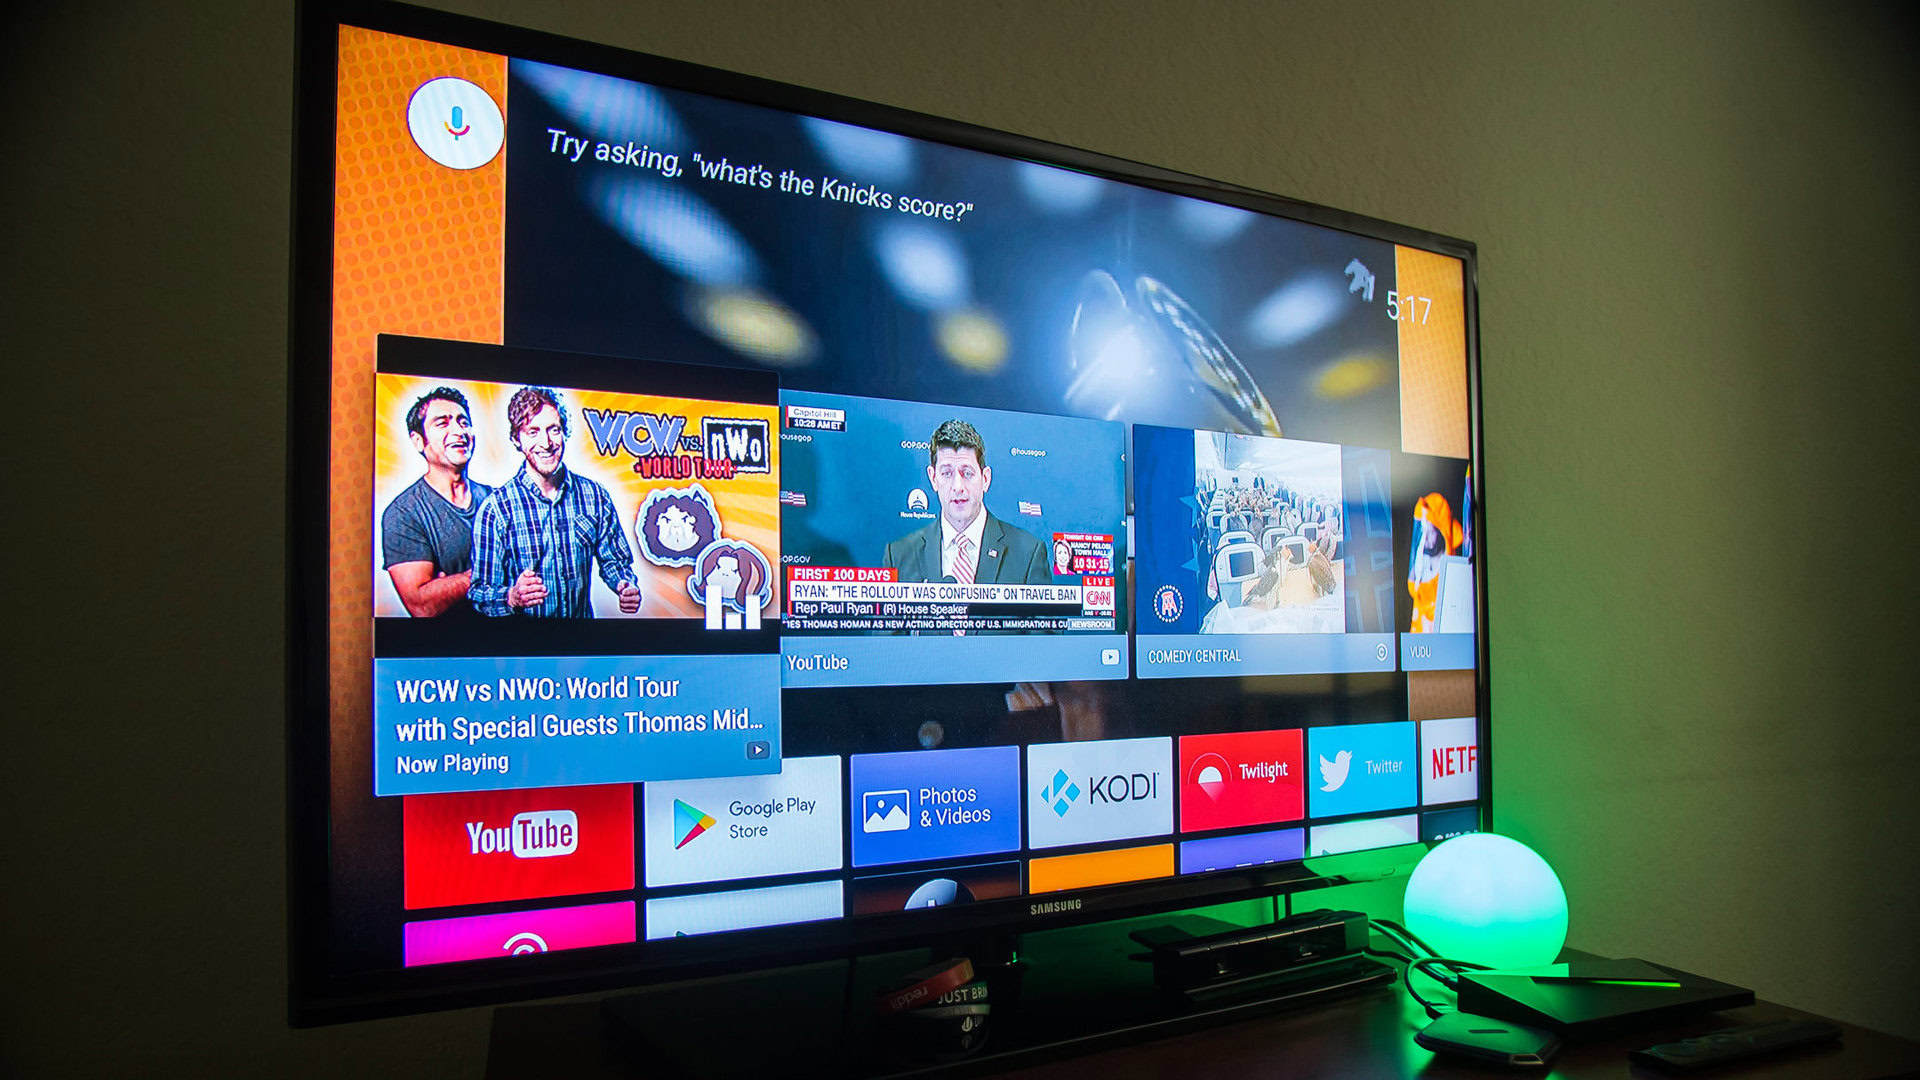 Is Android TV legal